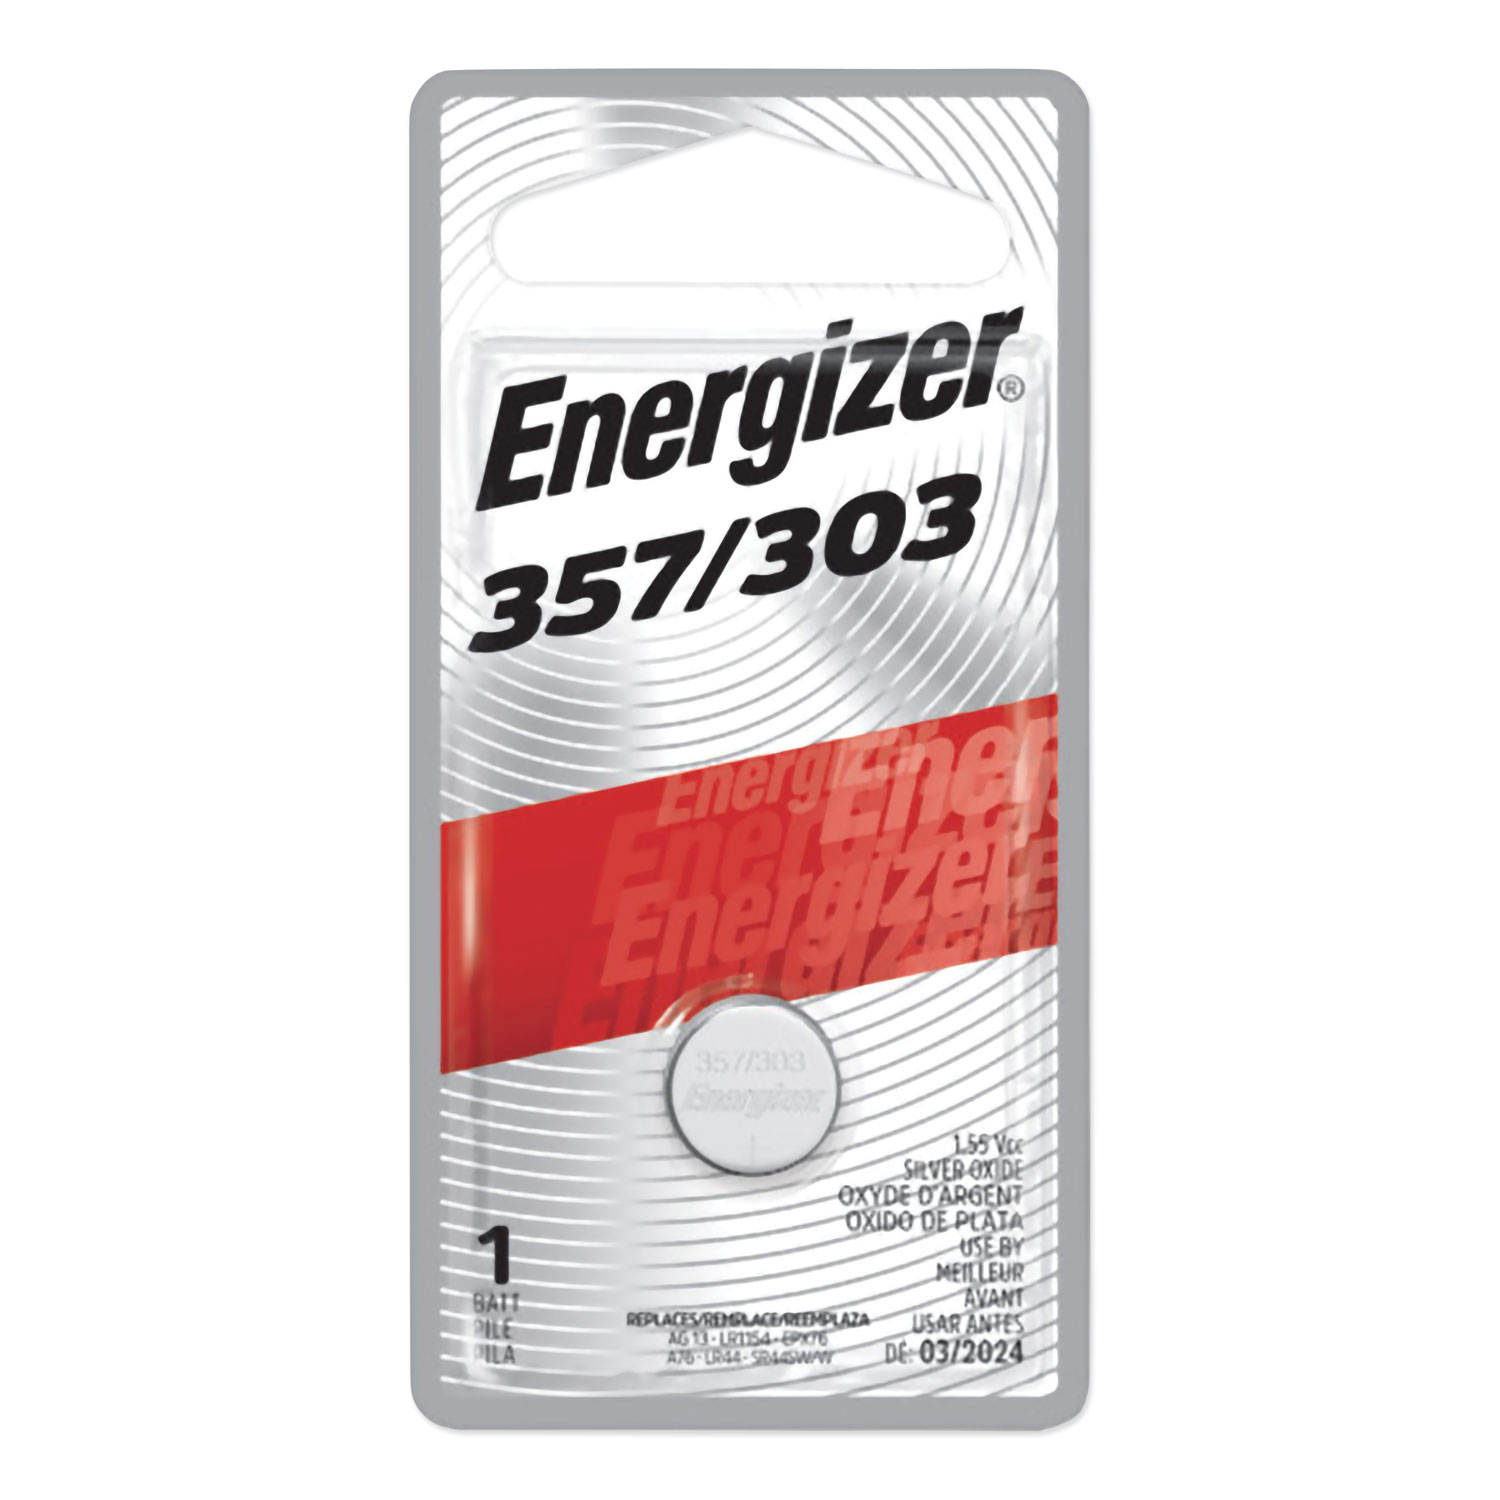  Energizer 357BPZ 357/303 Silver Oxide Button Cell Battery, 1.5V (EVE357BPZ) 